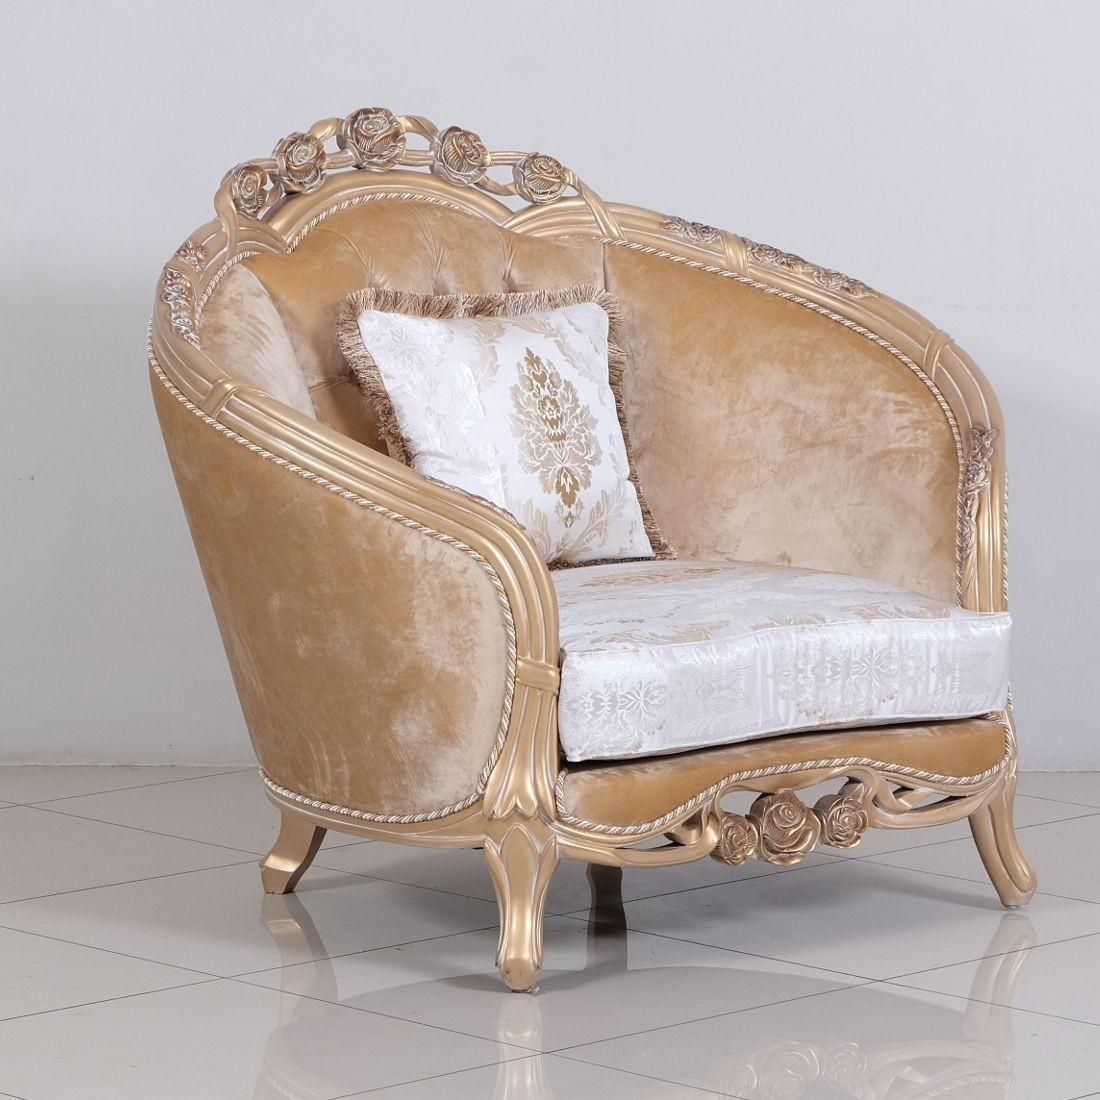 Classic, Traditional Arm Chair VALENTINA 45001-C in Off-White, Copper, Champagne Fabric